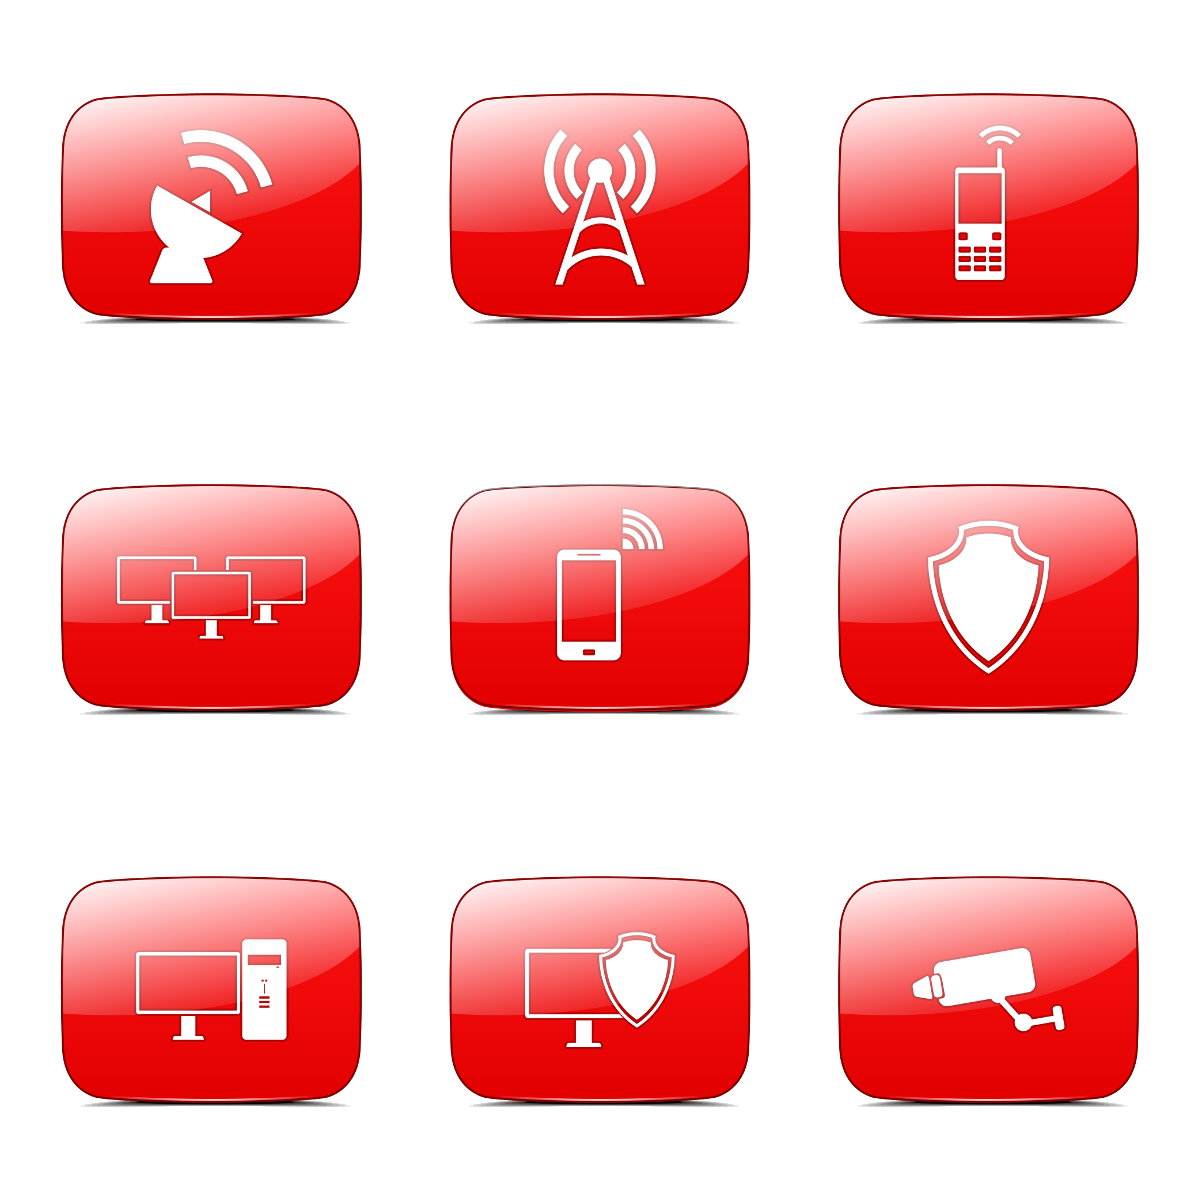 Button Icons of Communication Devices with Wifi Signals